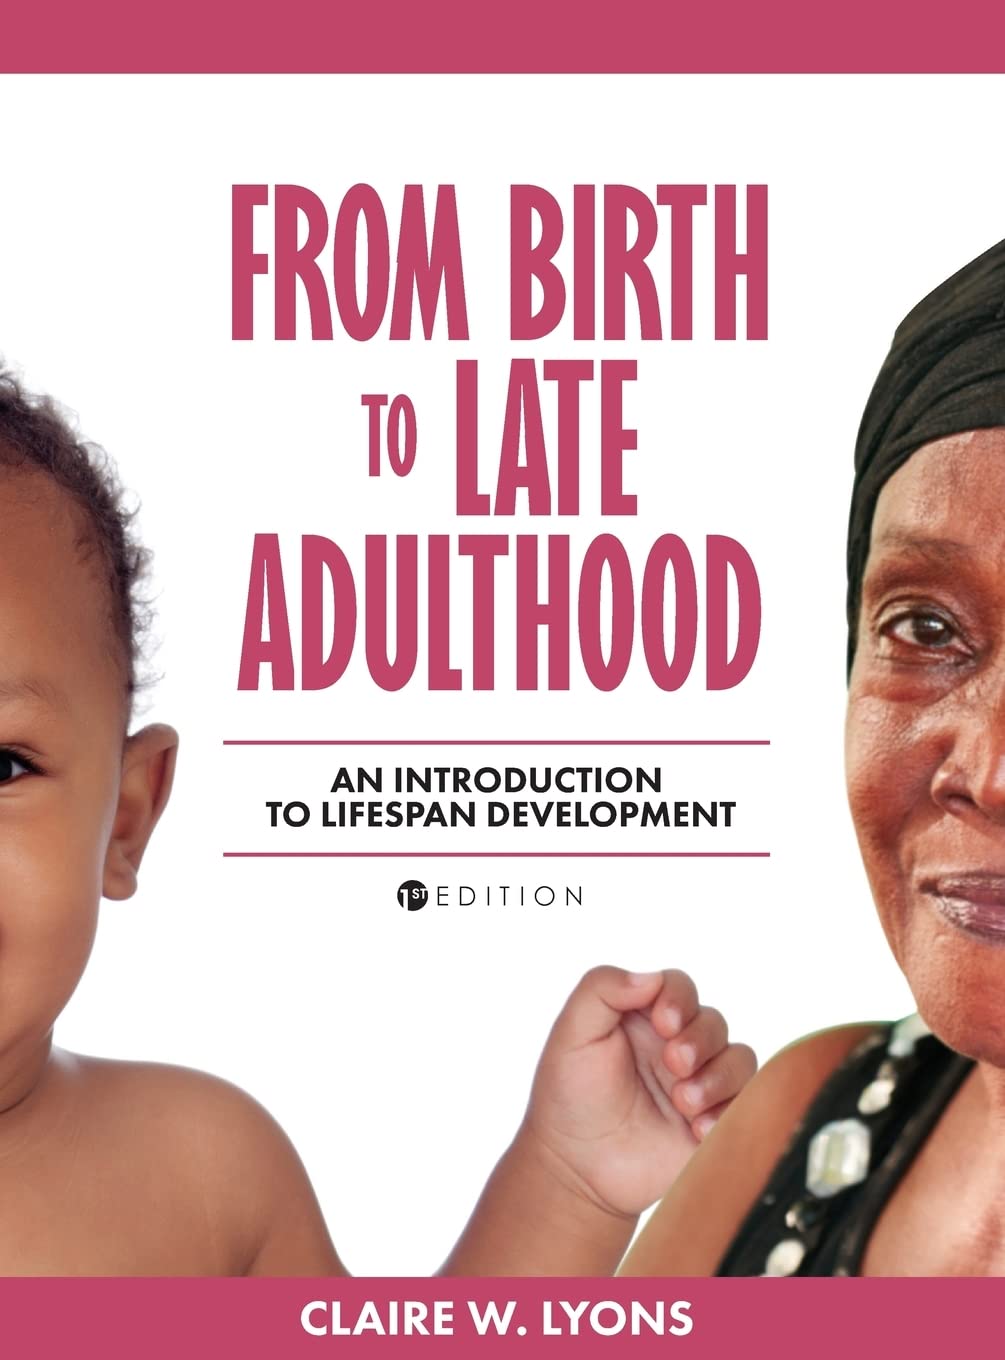 FROM_BIRTH to late adulthood by Claire W Lyons